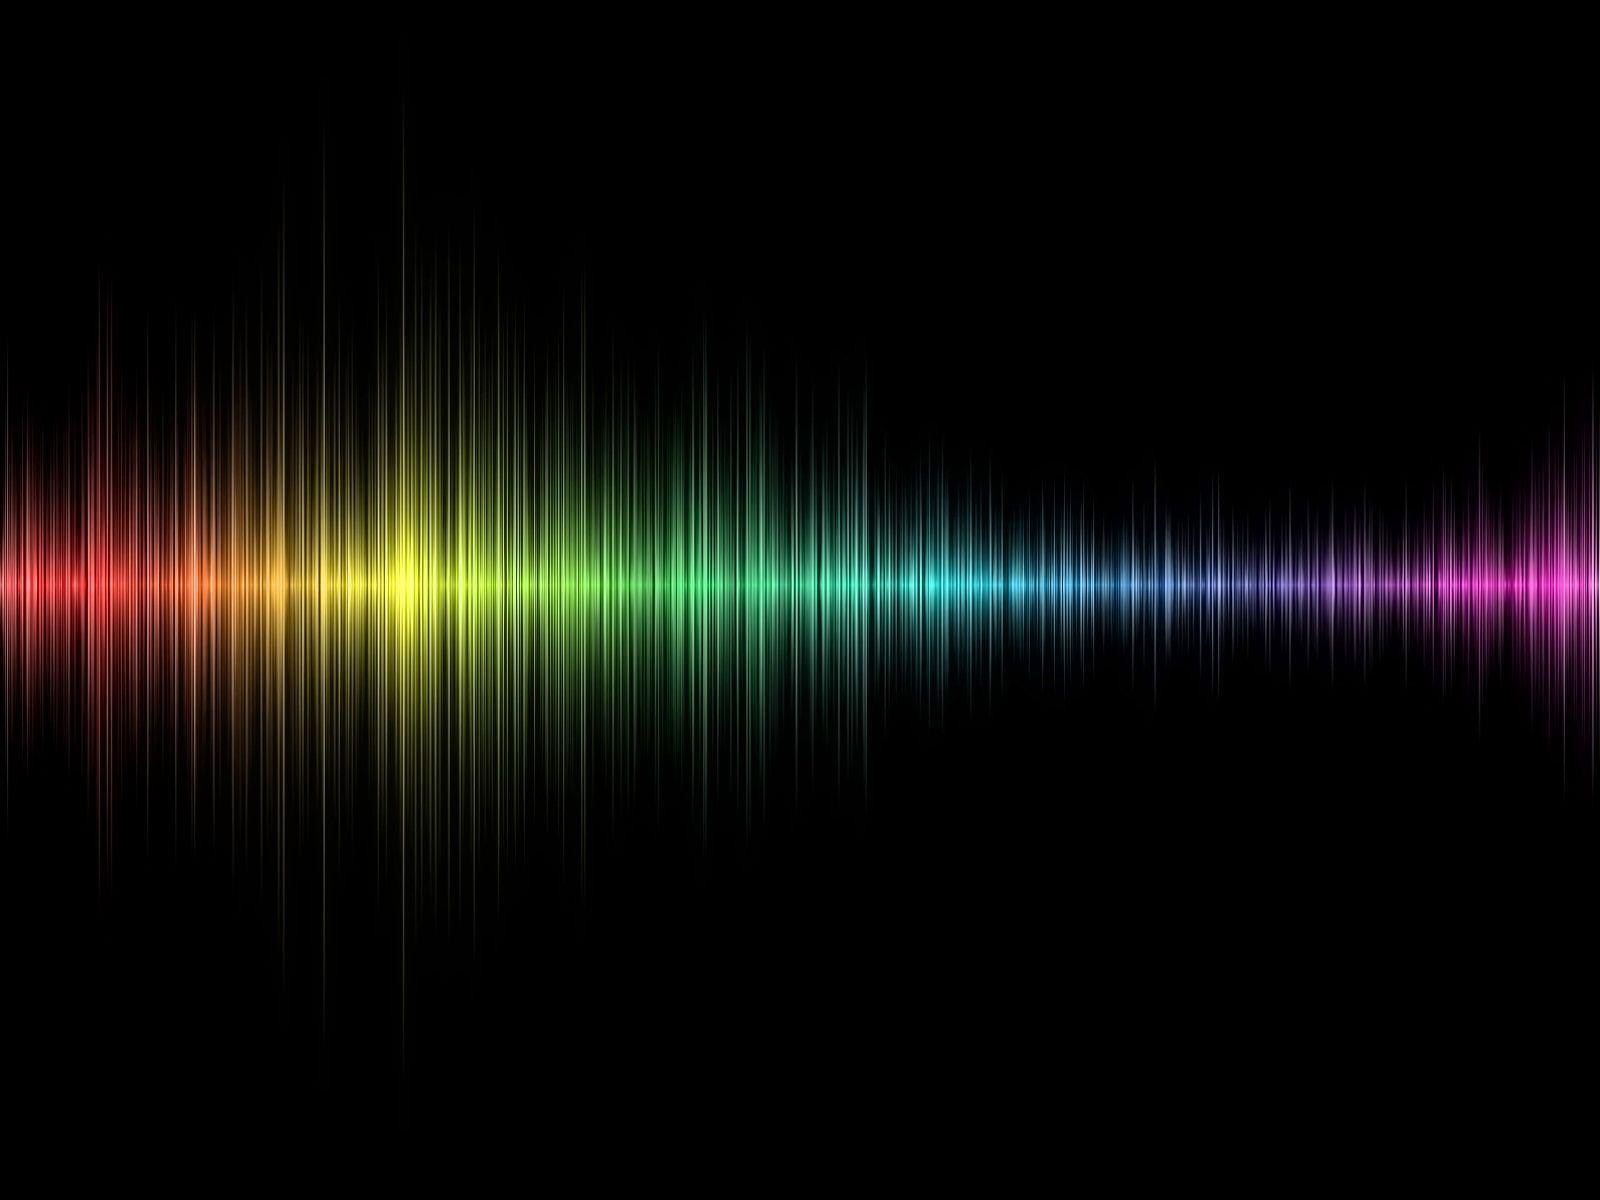 Wallpaper For > Cool Sound Waves Wallpaper. Music wallpaper, Sound waves, Waves wallpaper